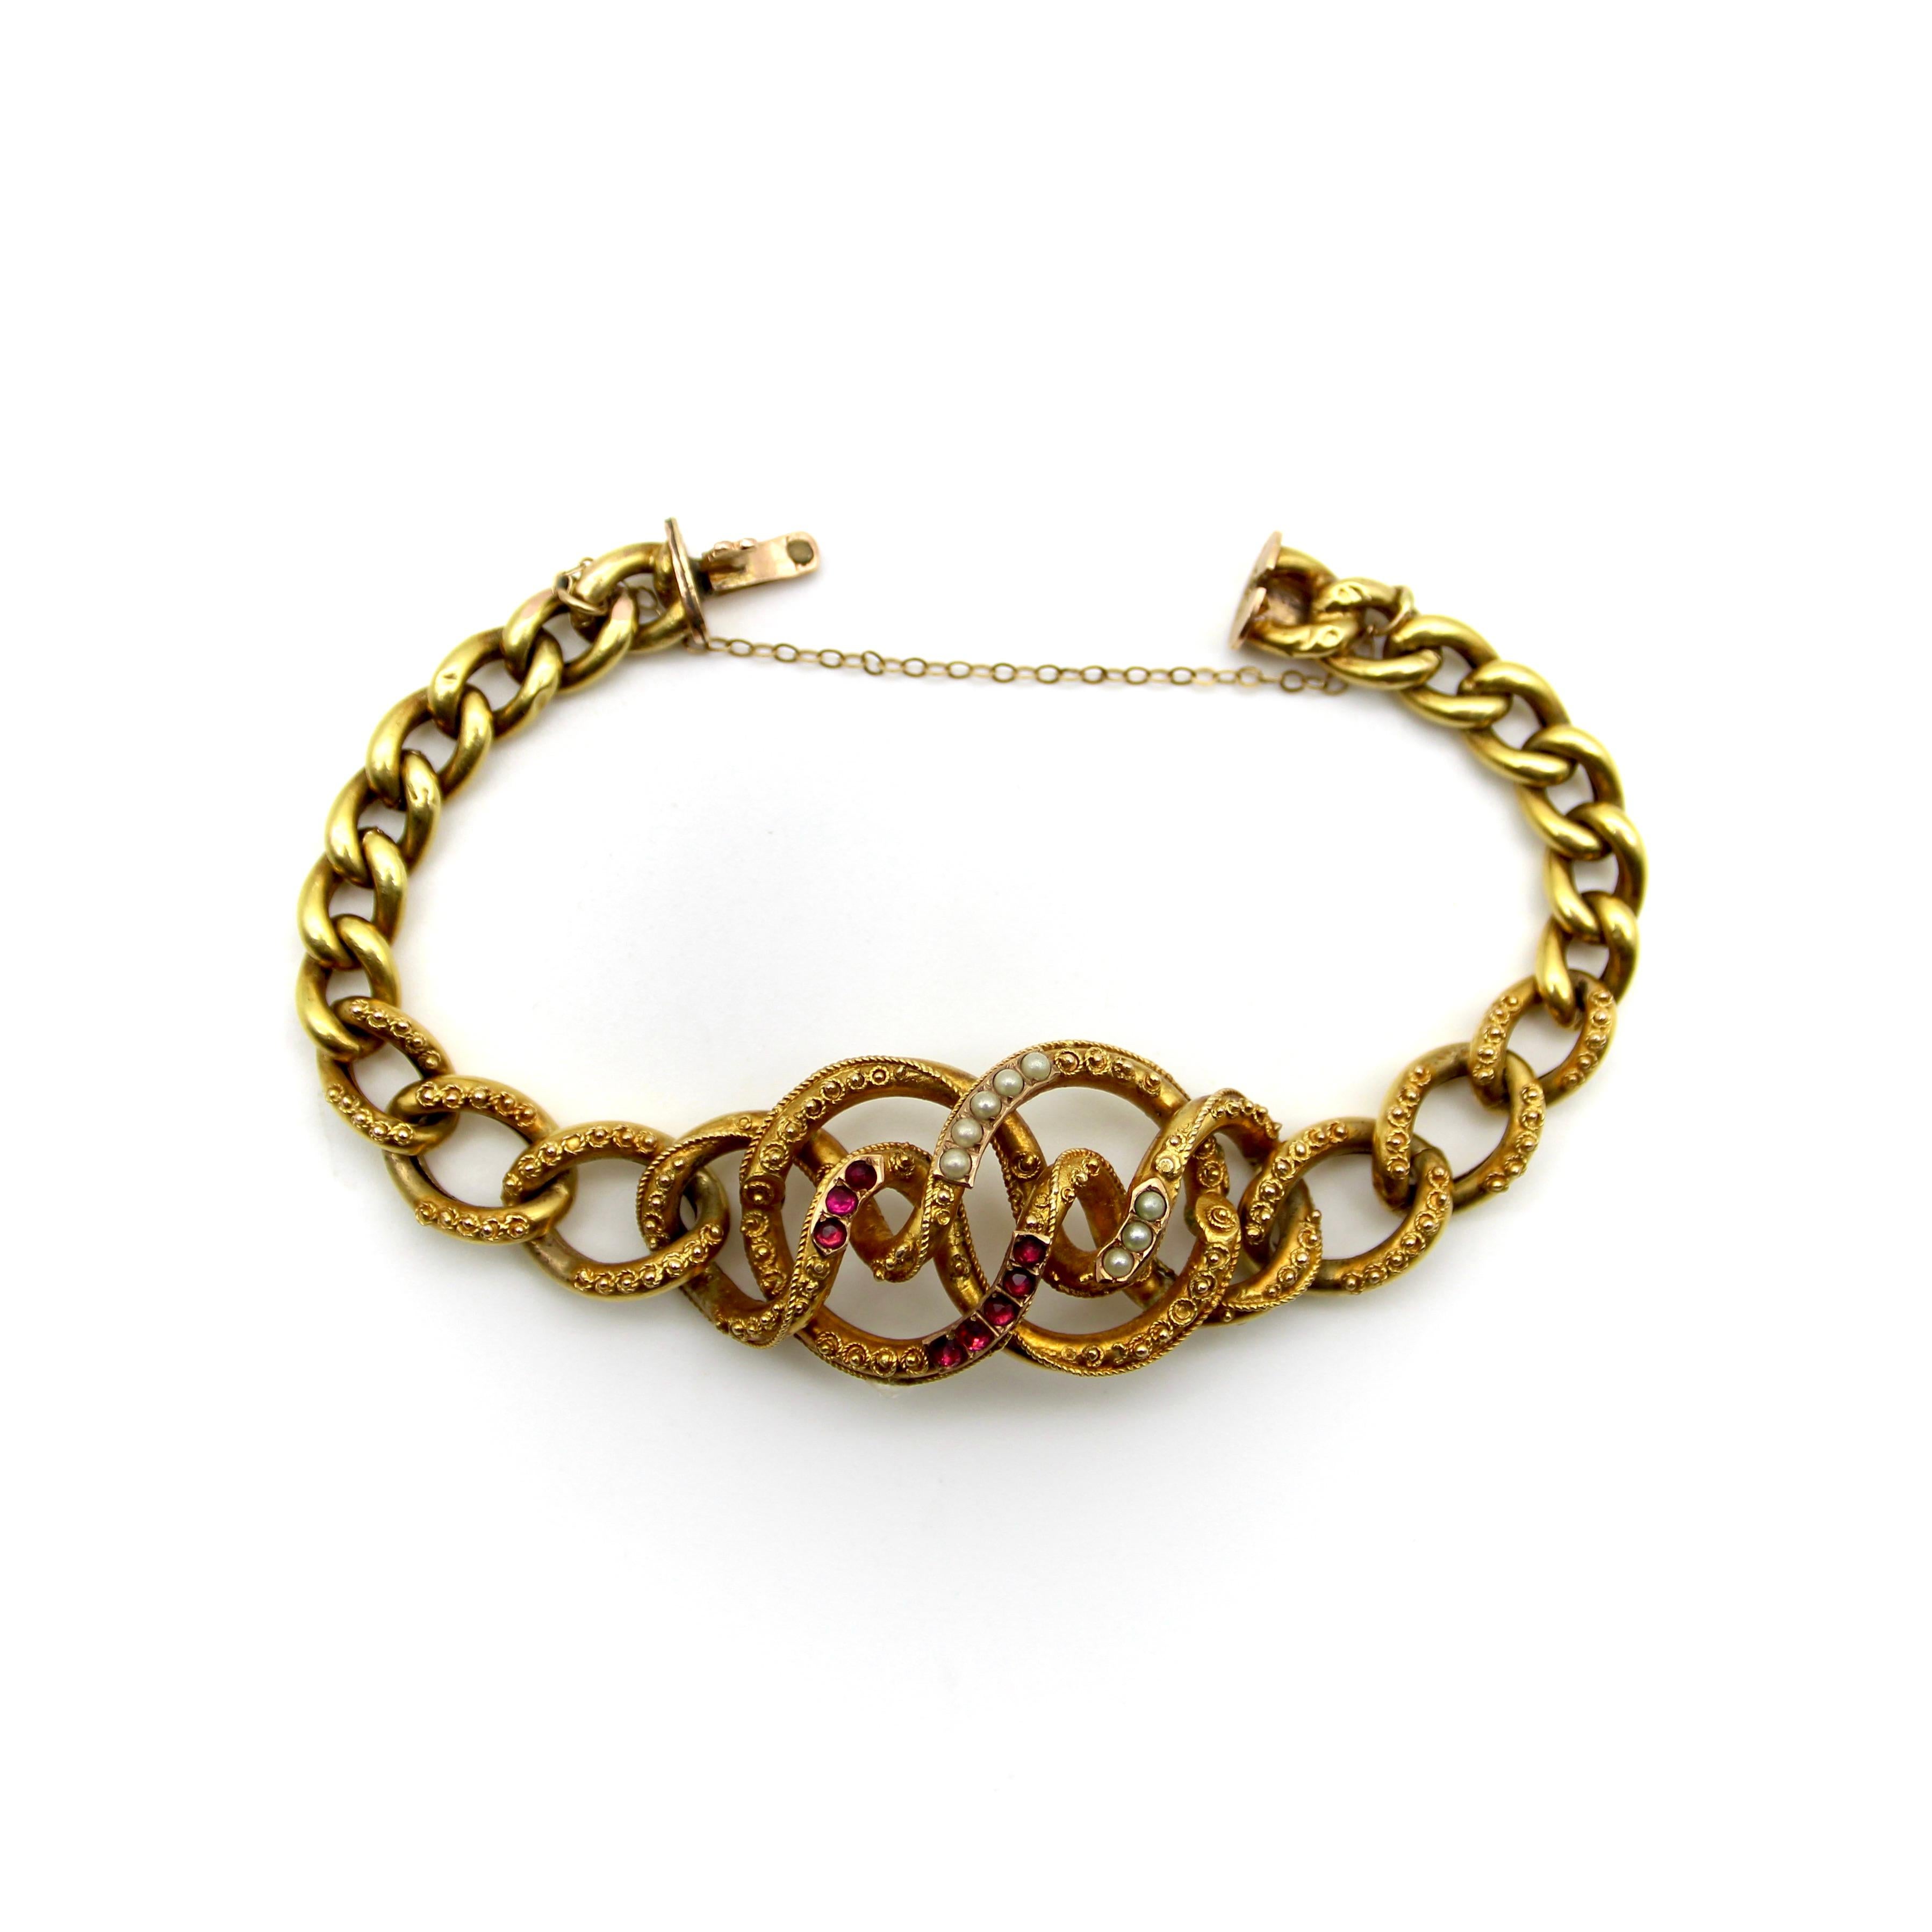 Single Cut 14K Gold Etruscan Revival Lover’s Knot Bracelet with Garnets and Pearls For Sale